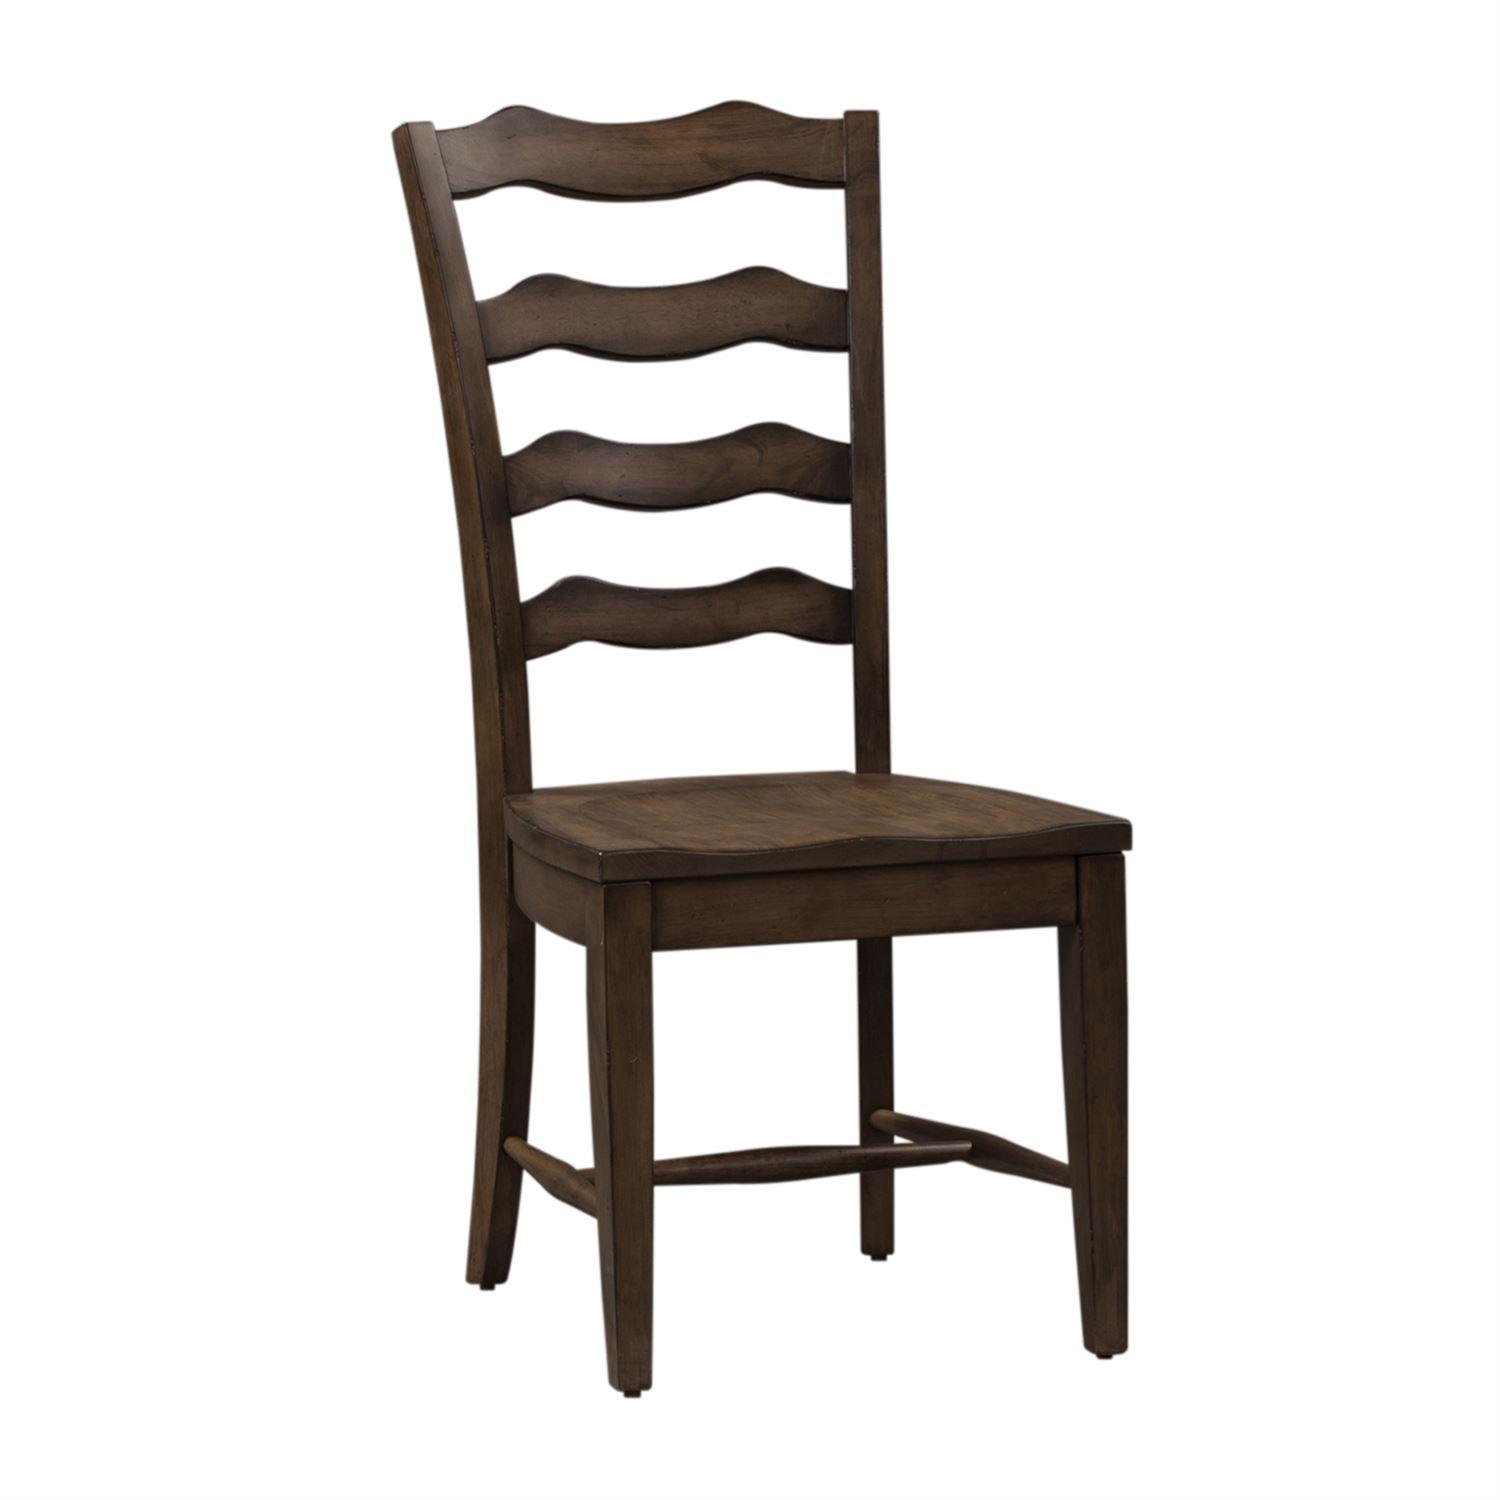   Parisian Marketplace  (698-DR) Dining Side Chair  